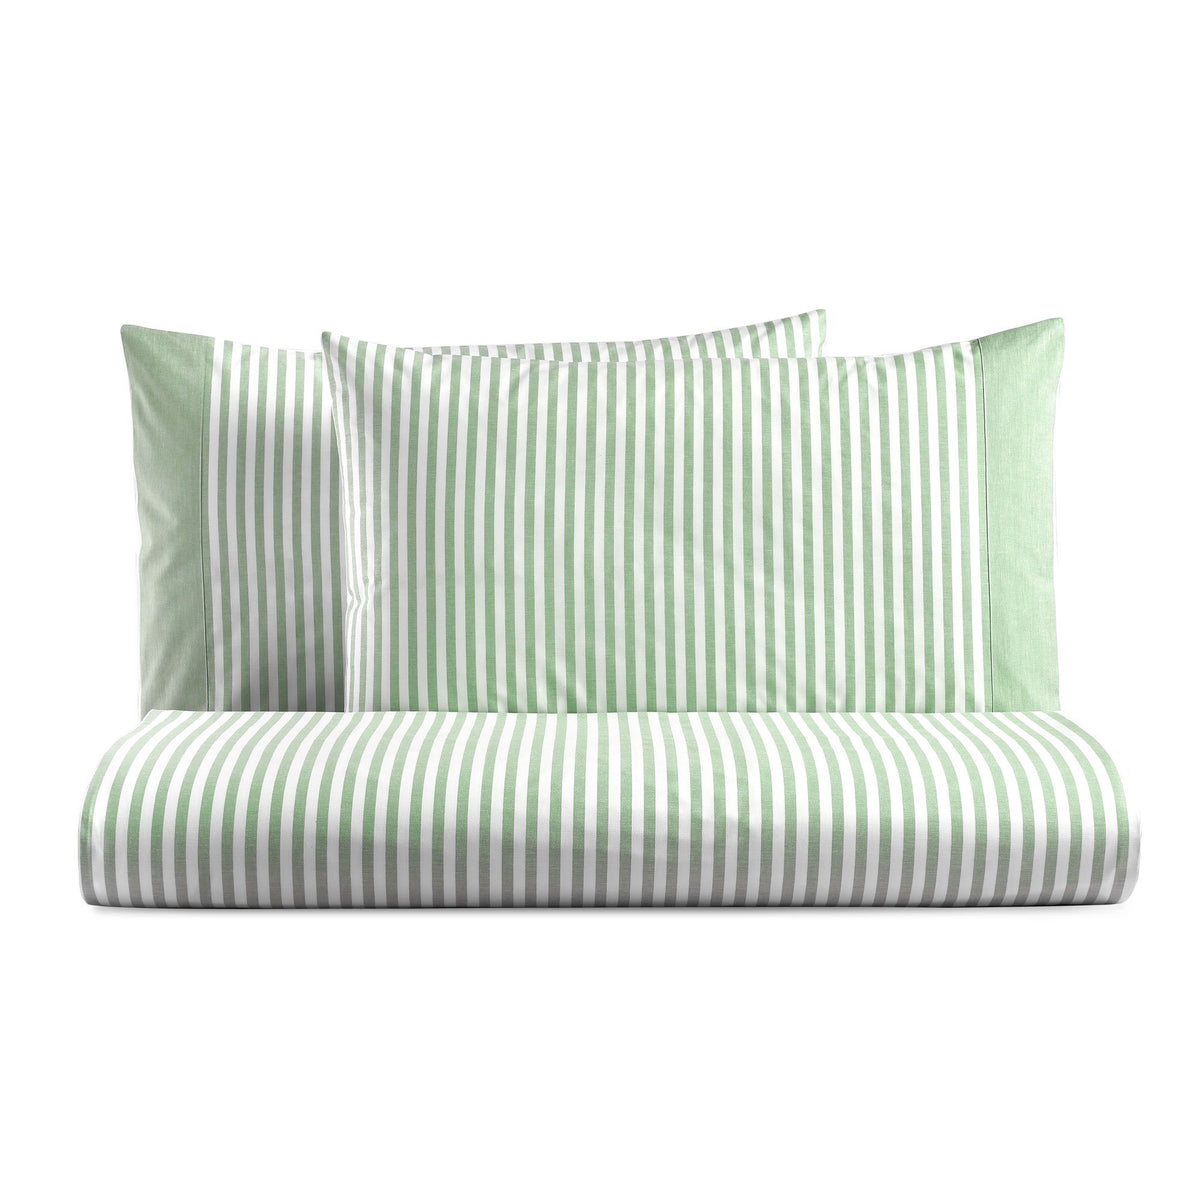 Duvet Cover Set in Pure Yarn-Dyed Striped Cotton - Tif